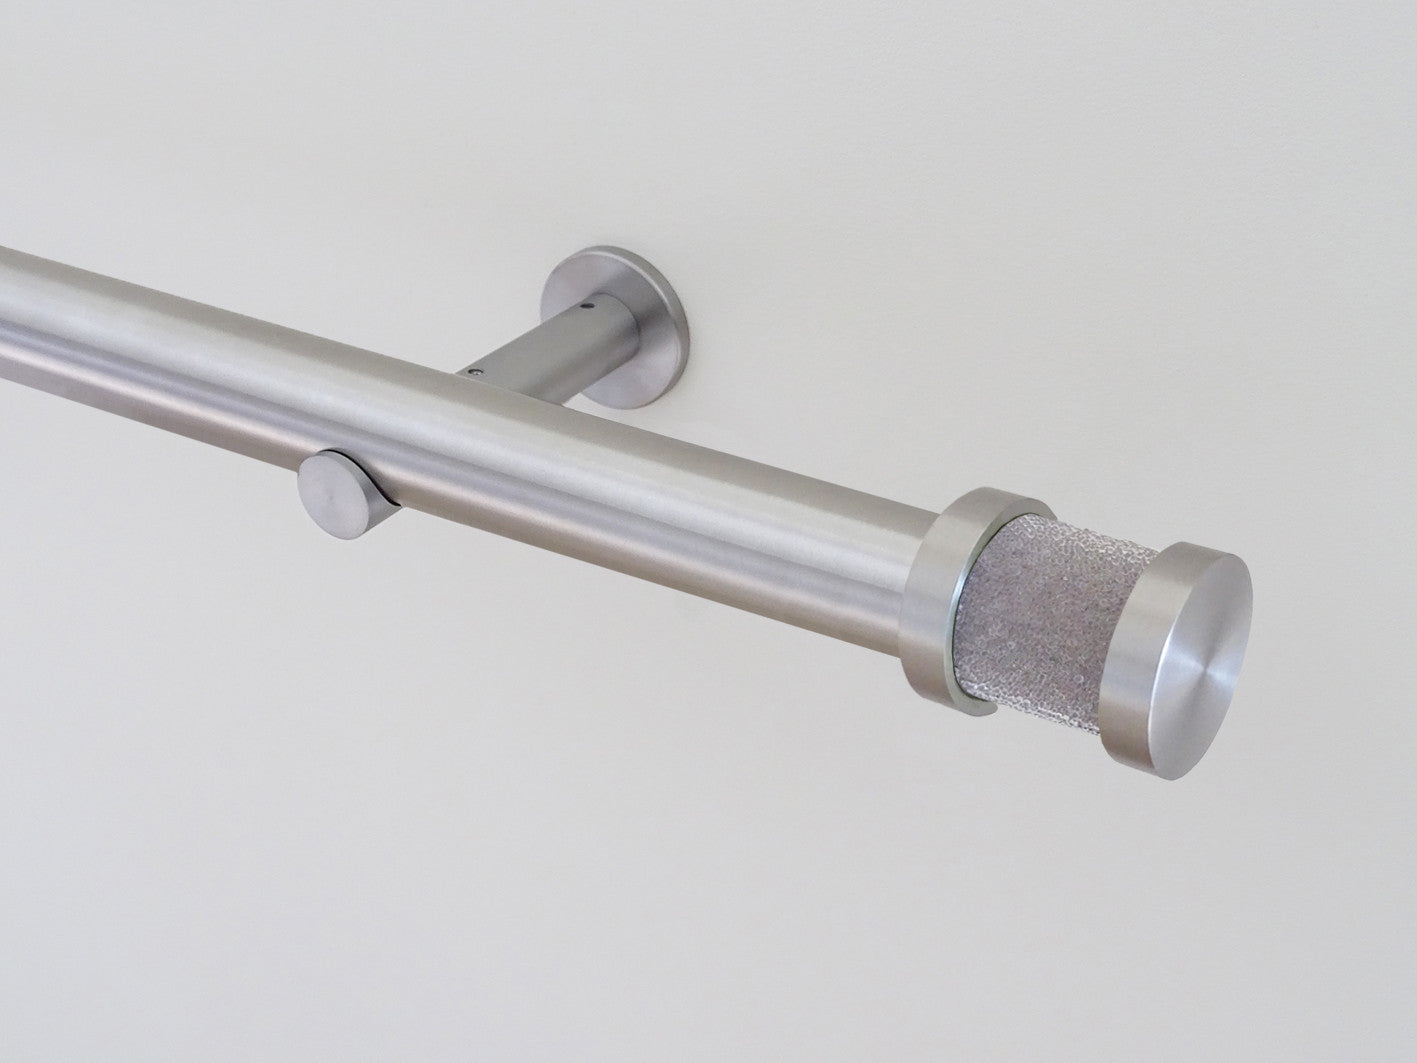 30mm diameter stainless steel curtain pole collection with oyster Groove finials